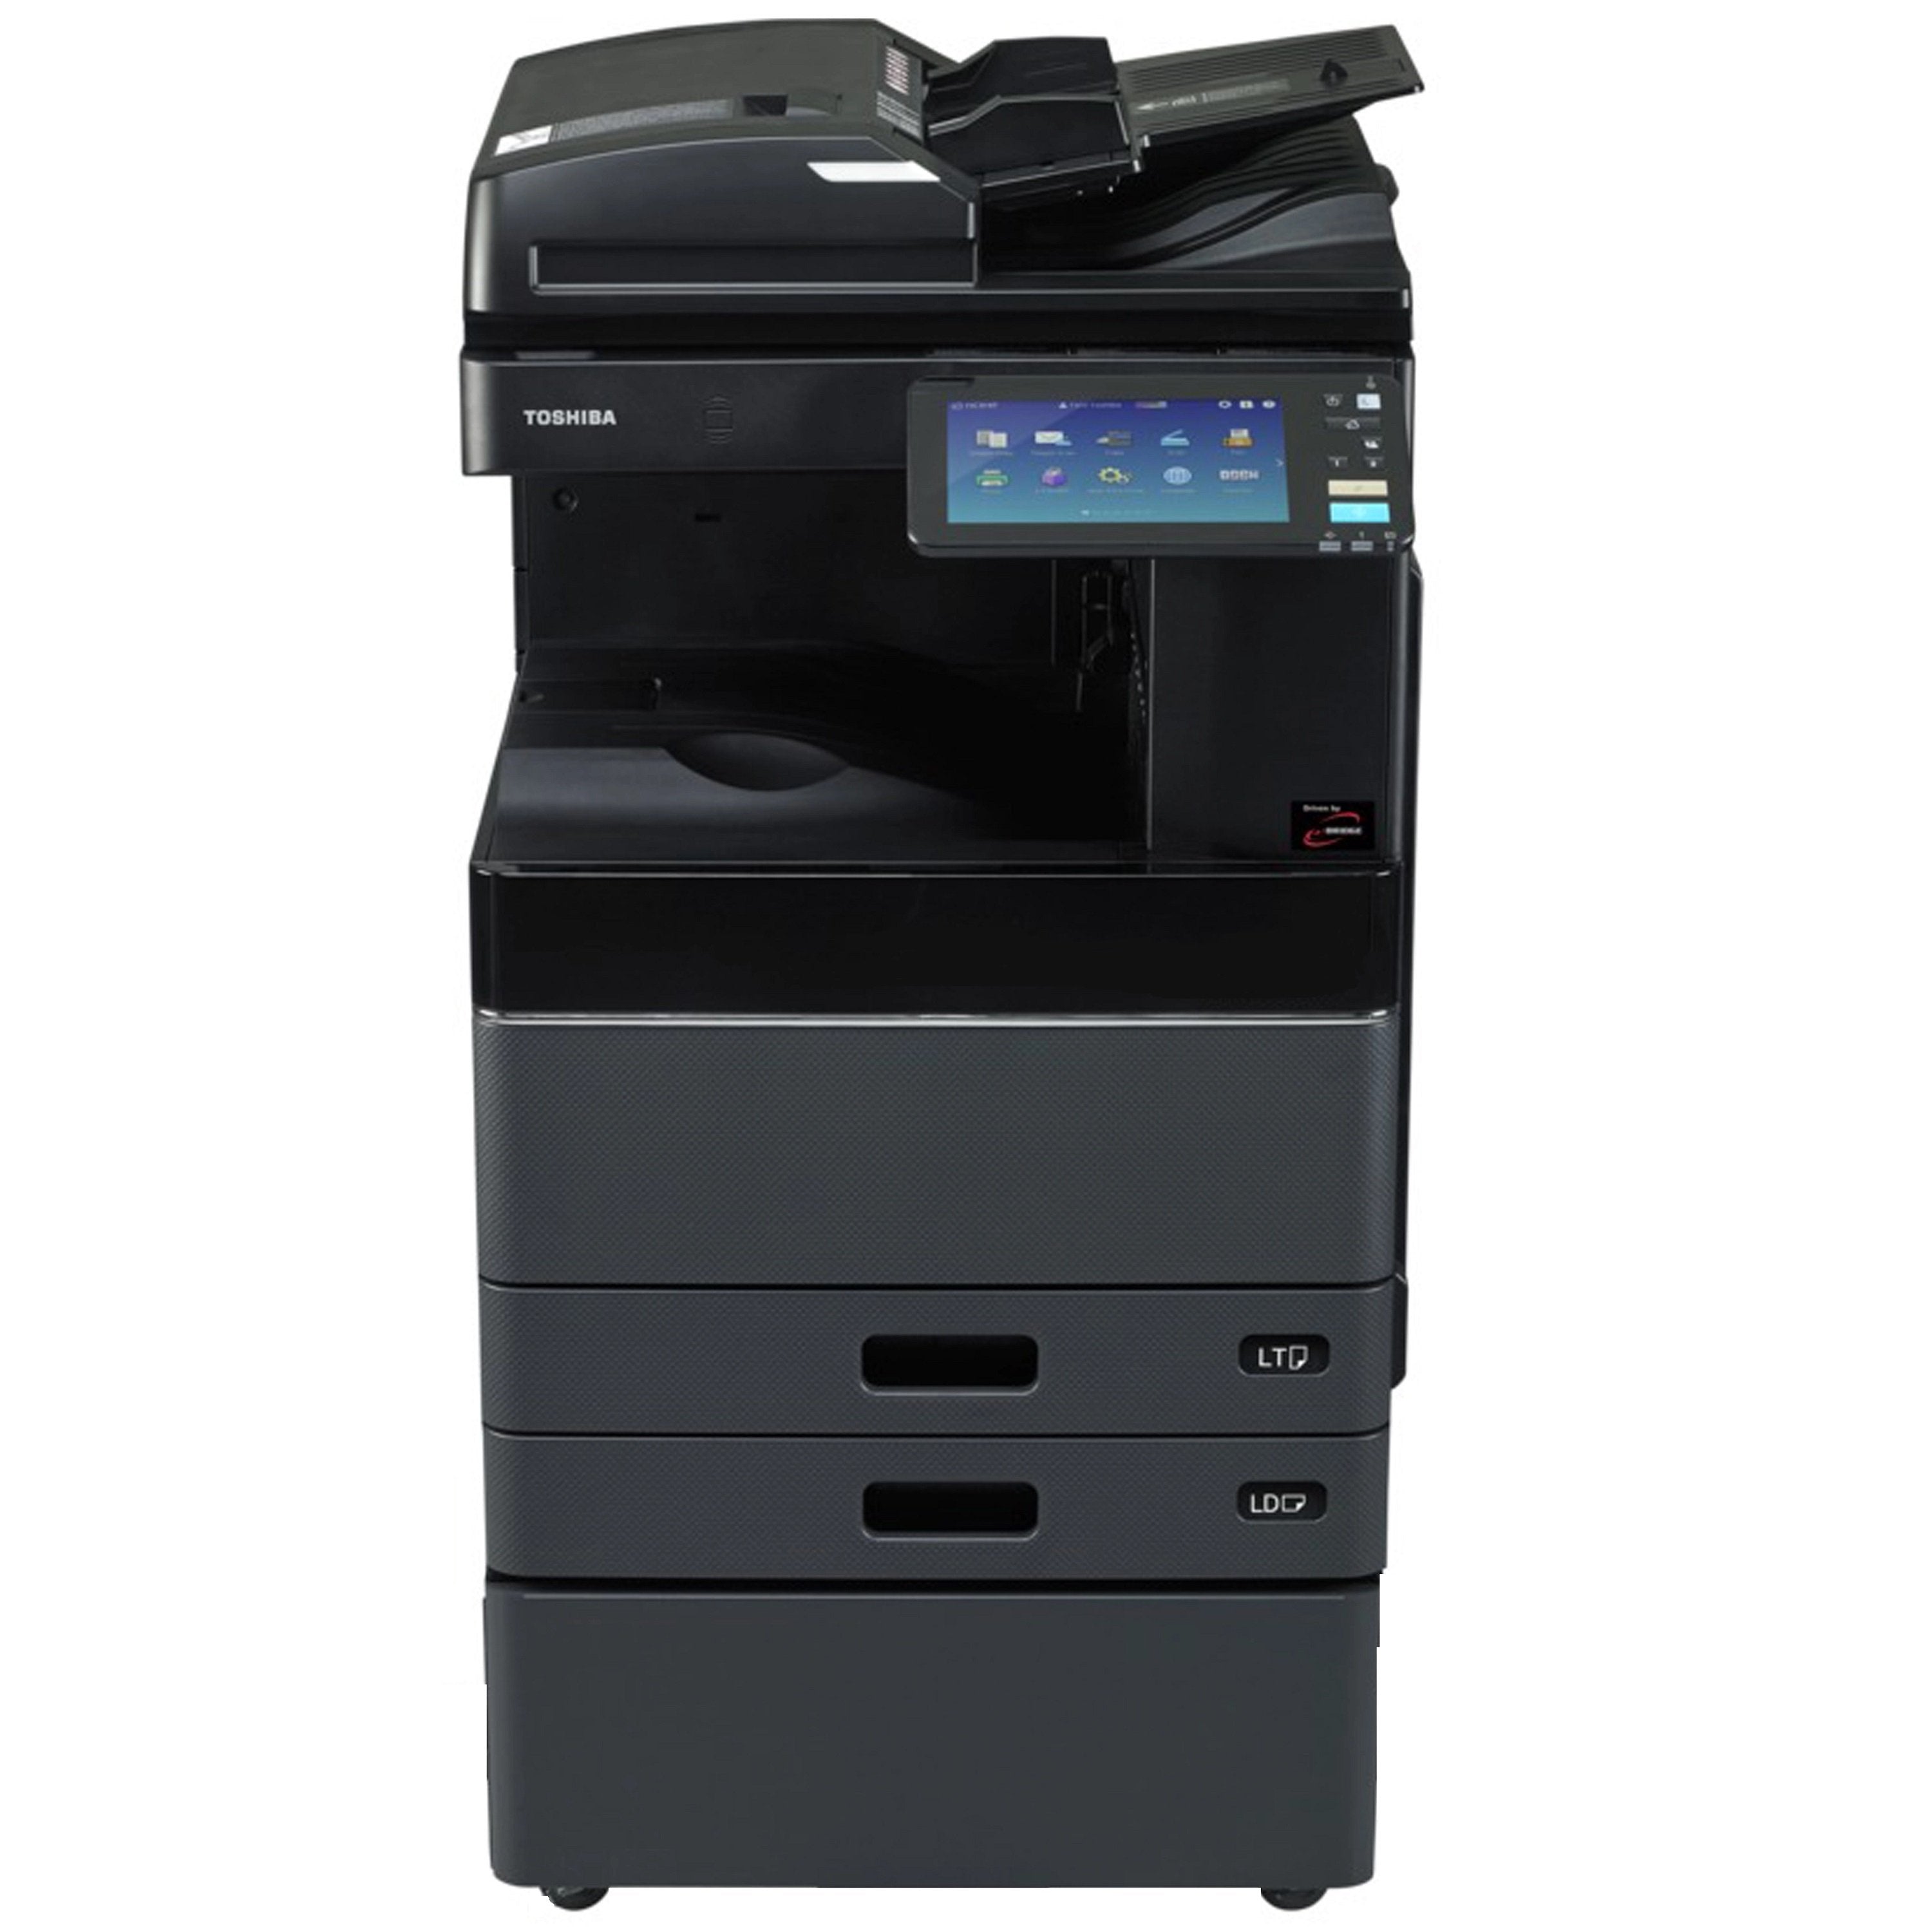 Absolute Toner $55.25/Month Toshiba E-Studio 3008A A3/A4 Monochrome Laser Multifunction Copier Printer Scanner For Office Use Showroom Monochrome Copiers